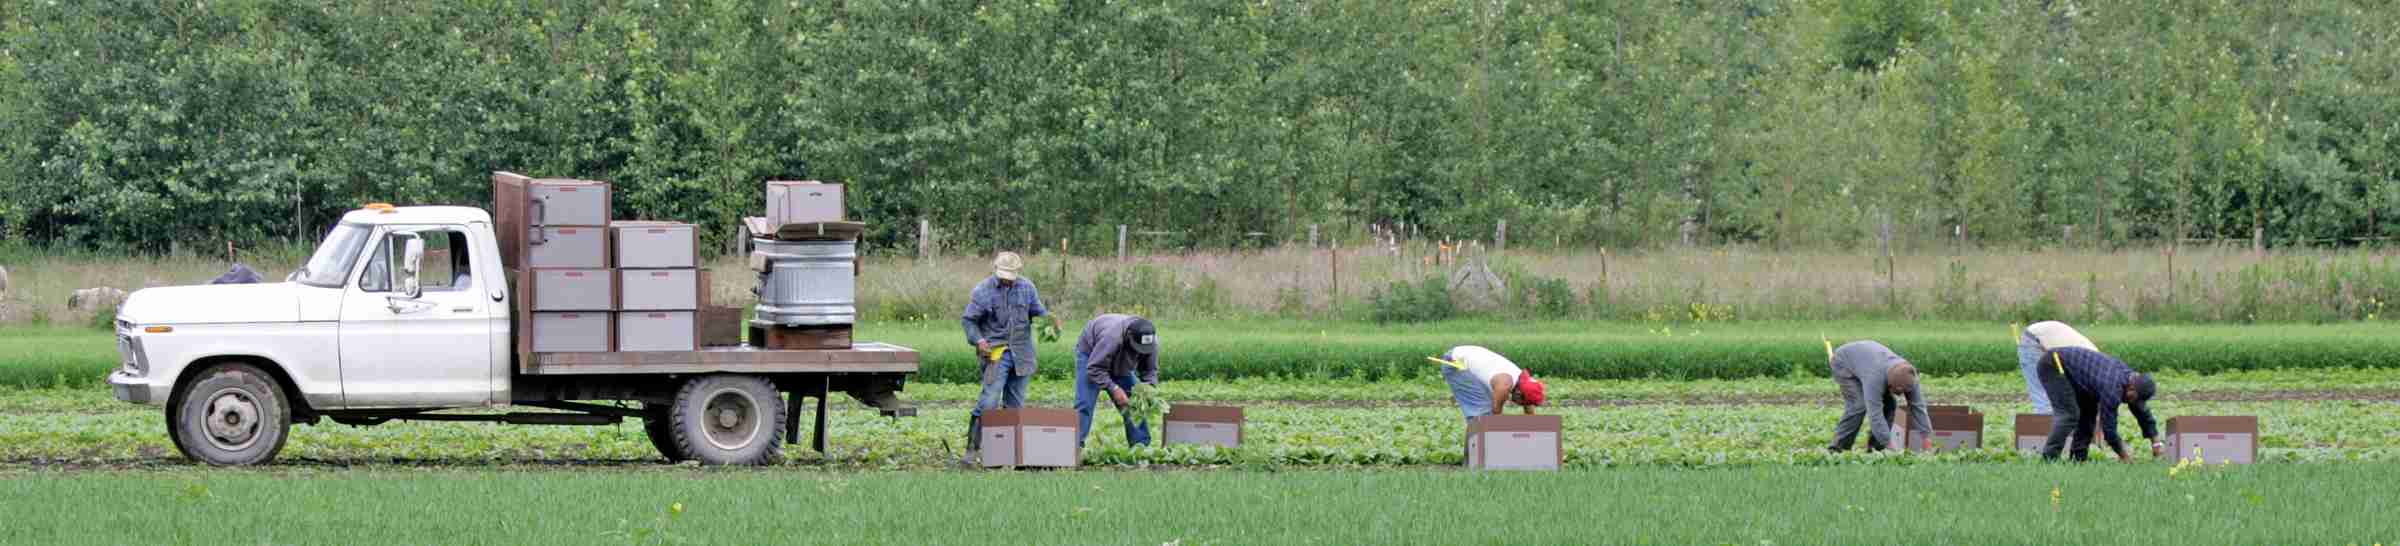 migrant farm workers 